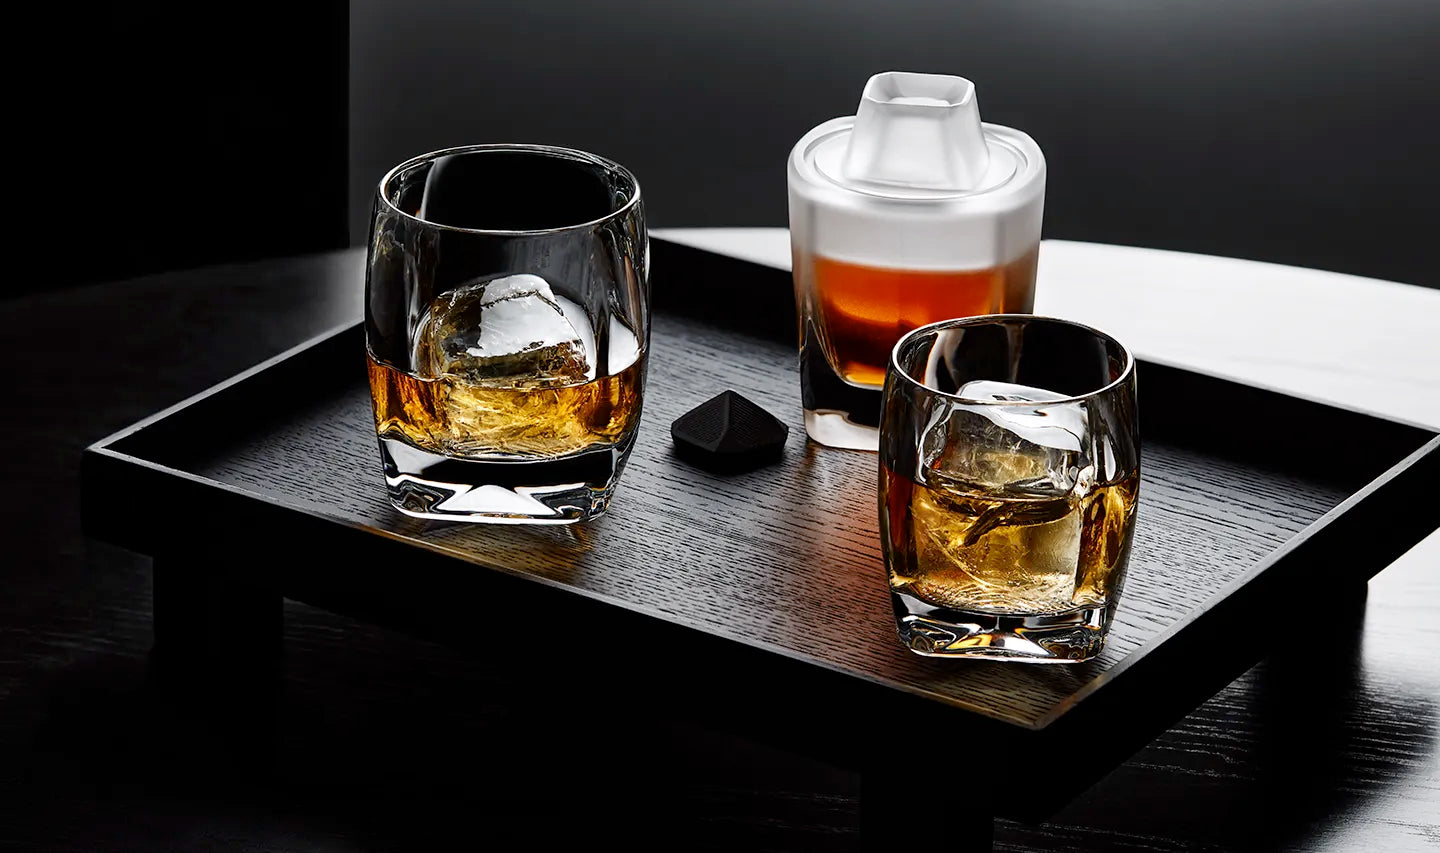 Non-leaded crystal tumbler available in two sizes for whisky on the rocks or crafted cocktails.